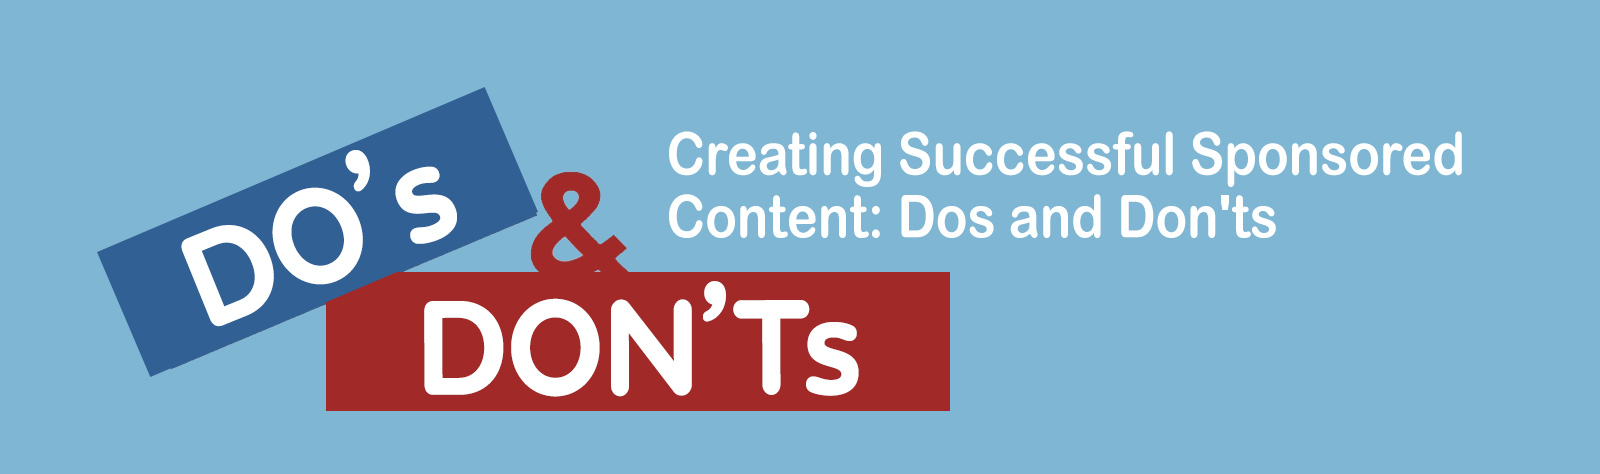 Creating Successful Sponsored Content: Dos and Don'ts